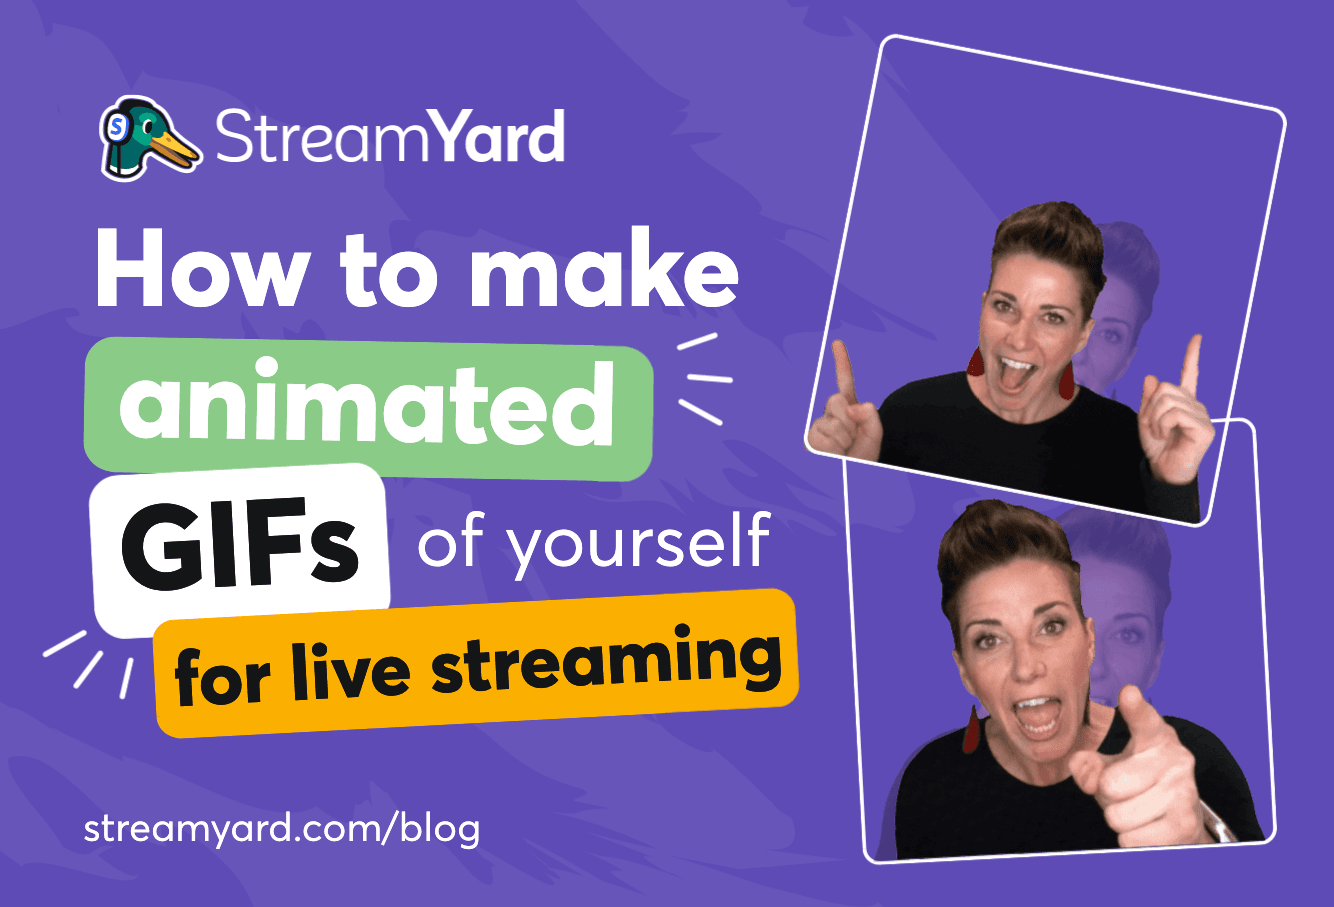 Enhance your live streams with animated GIFs. Follow this simple guide to learn how to make animated GIFs of yourself for live streaming.